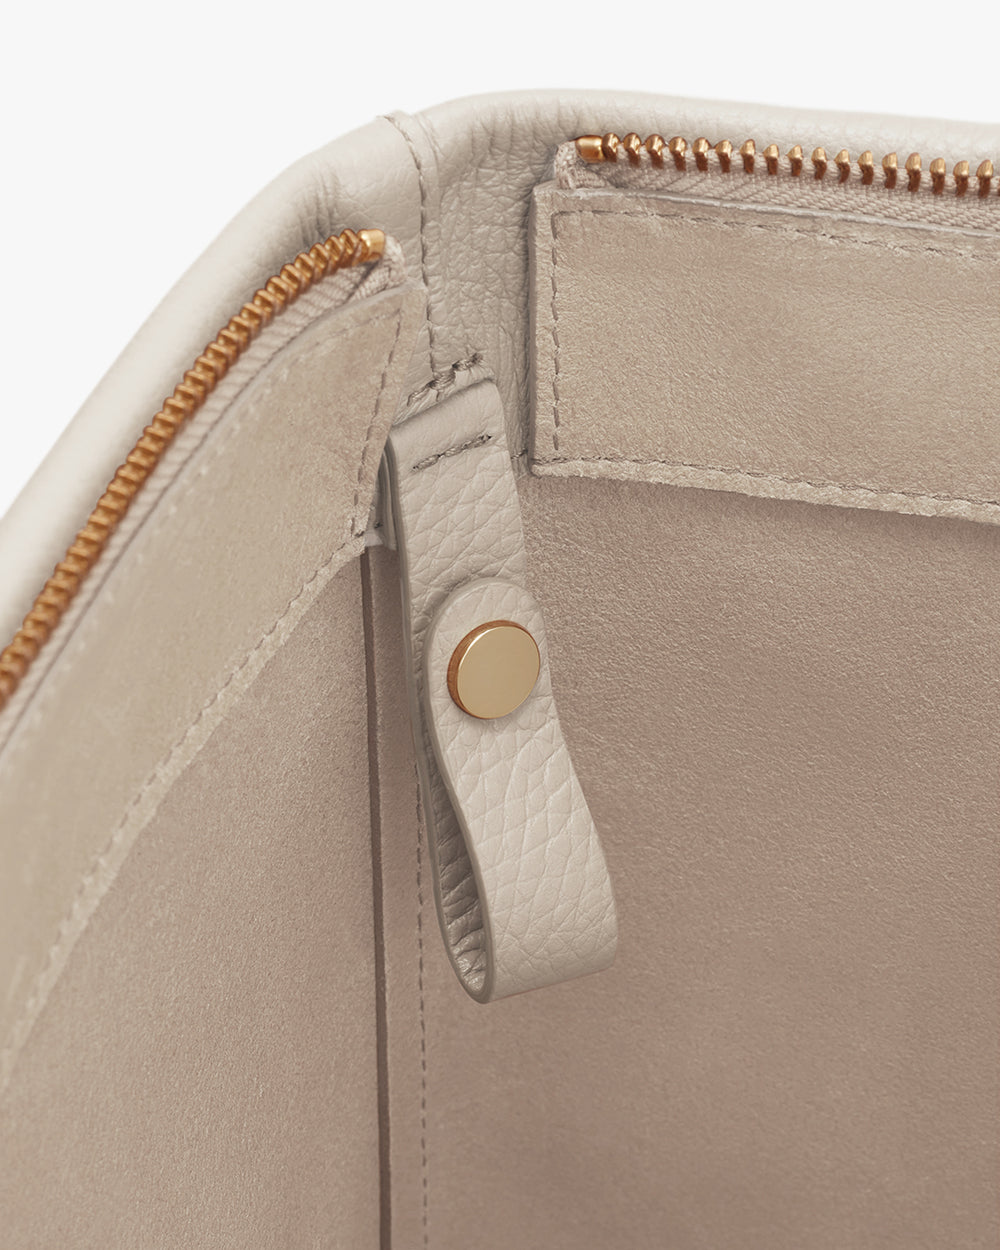 Close-up of a bag with a zipper and a snap button on a flap.